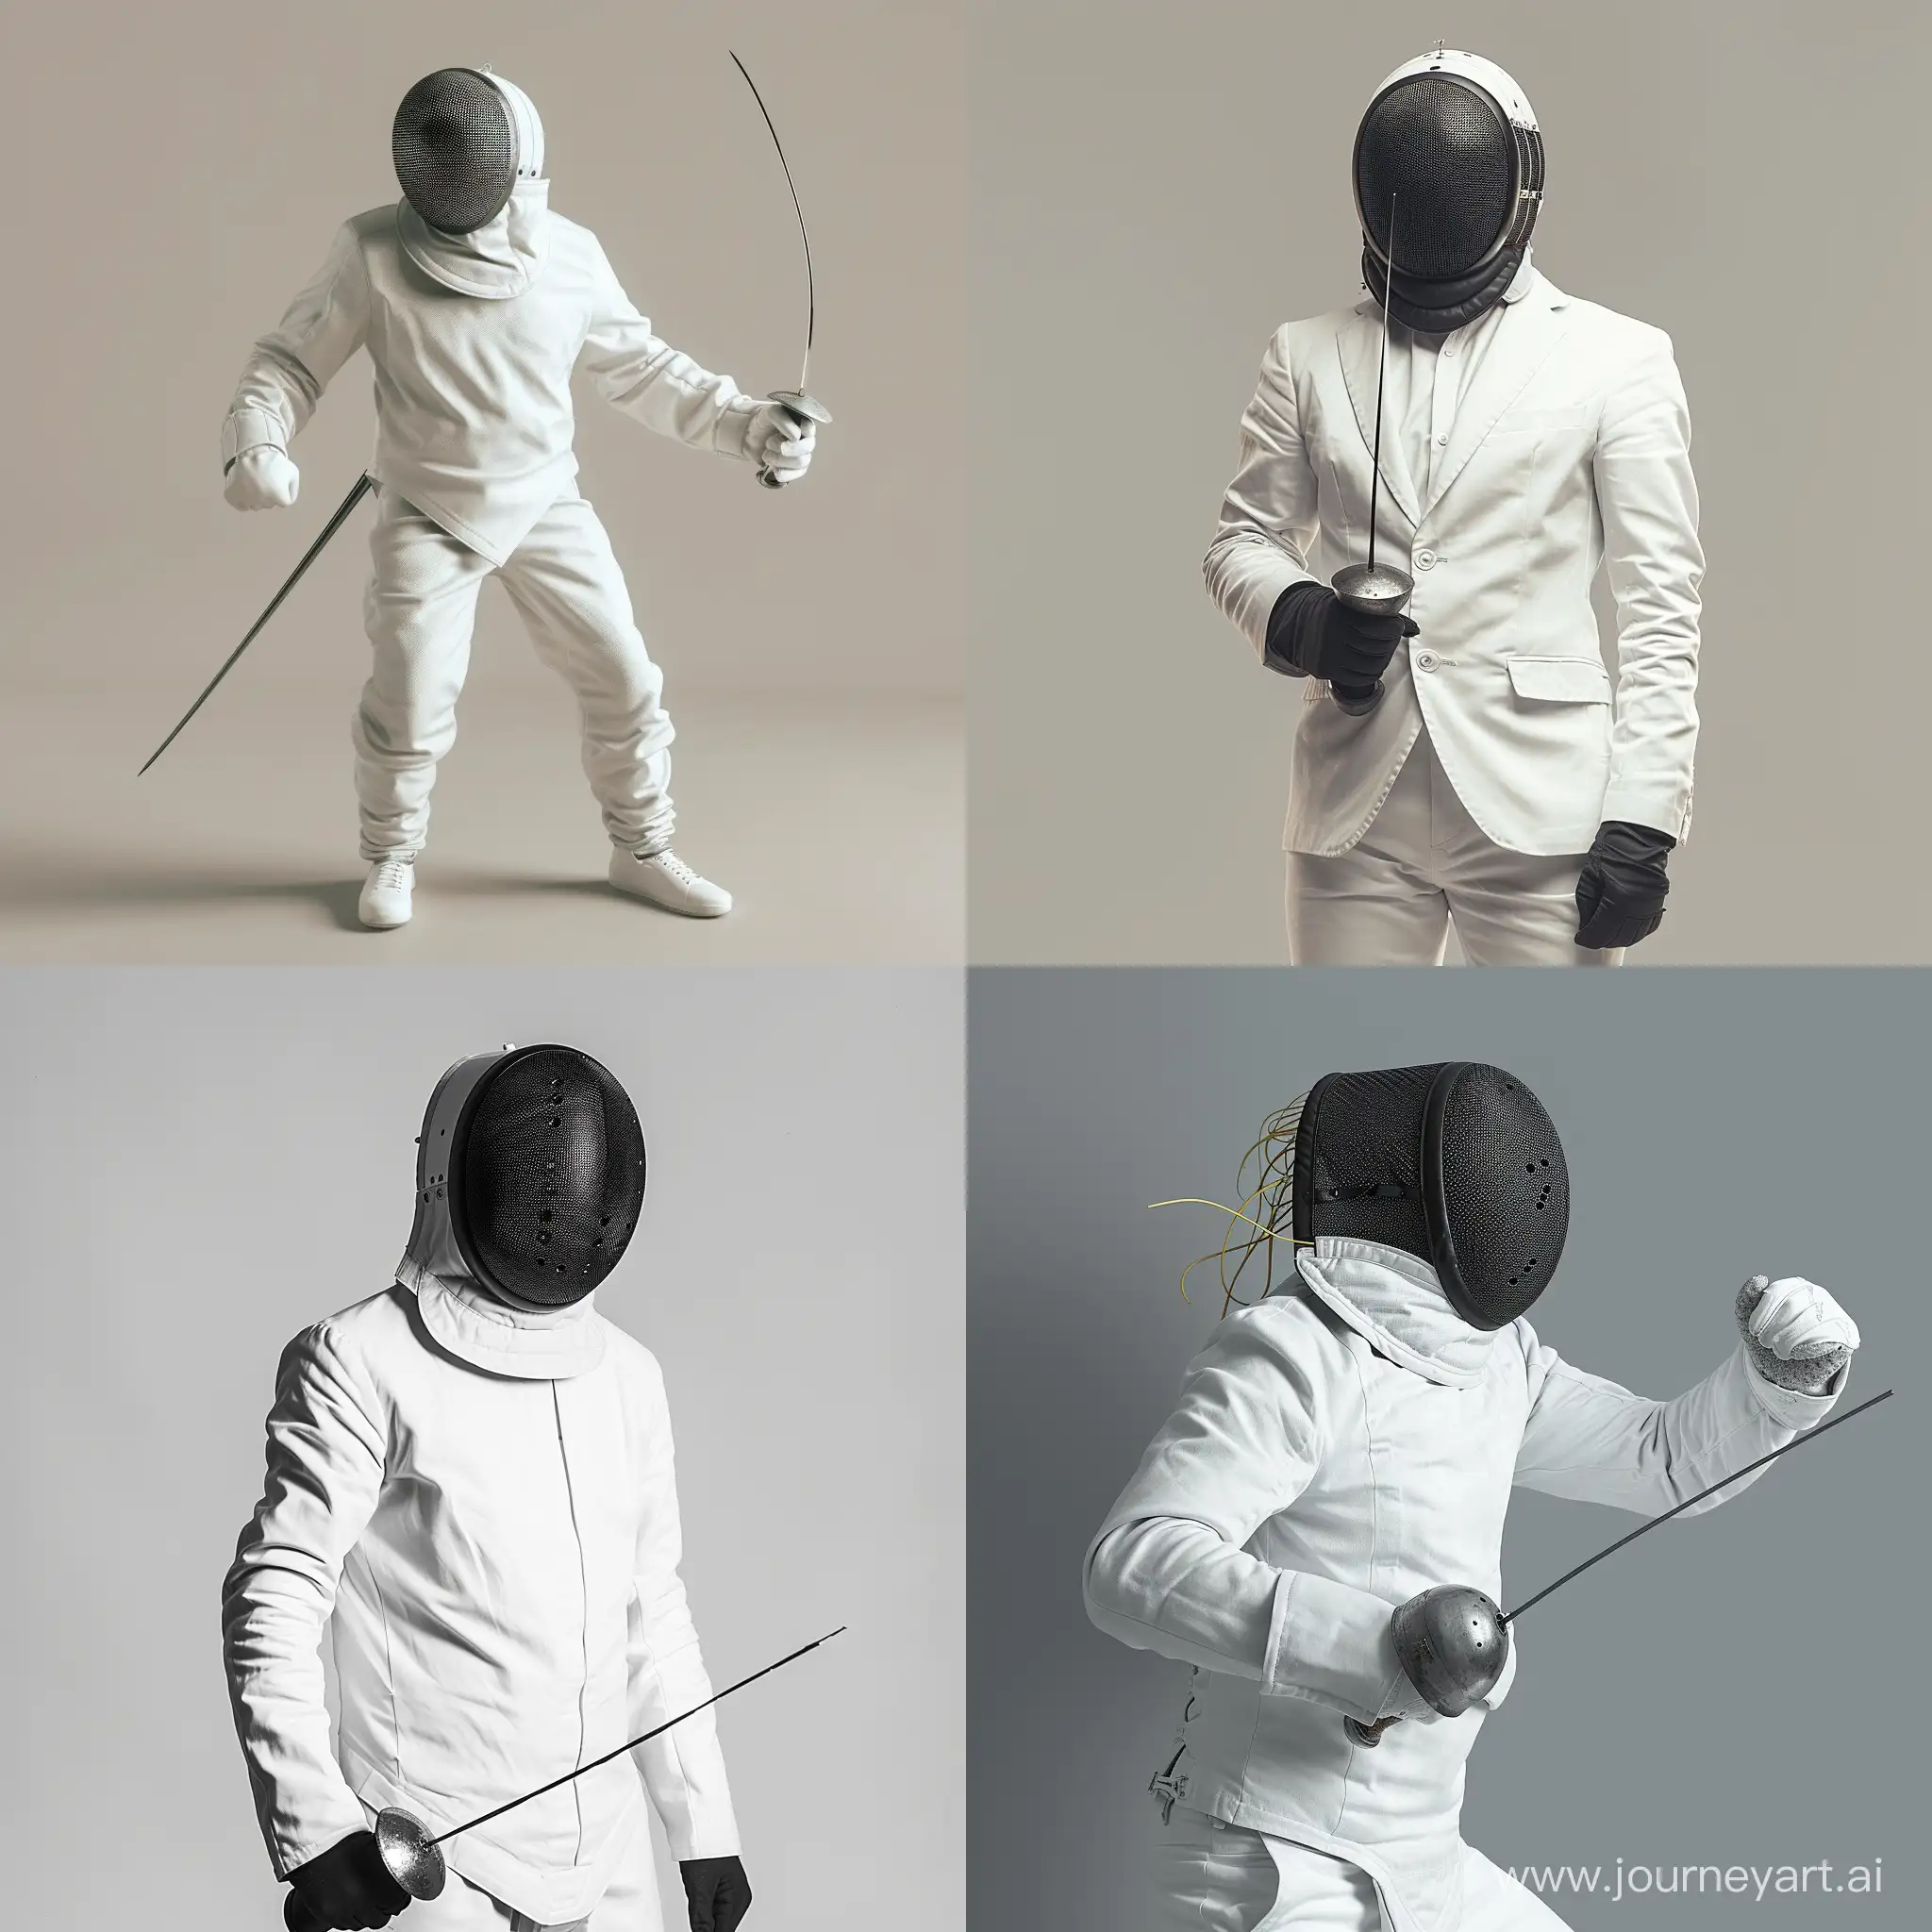 Mysterious-Figure-in-White-Suit-and-Spaghetti-Fencing-Mask-on-Detailed-Flat-Background